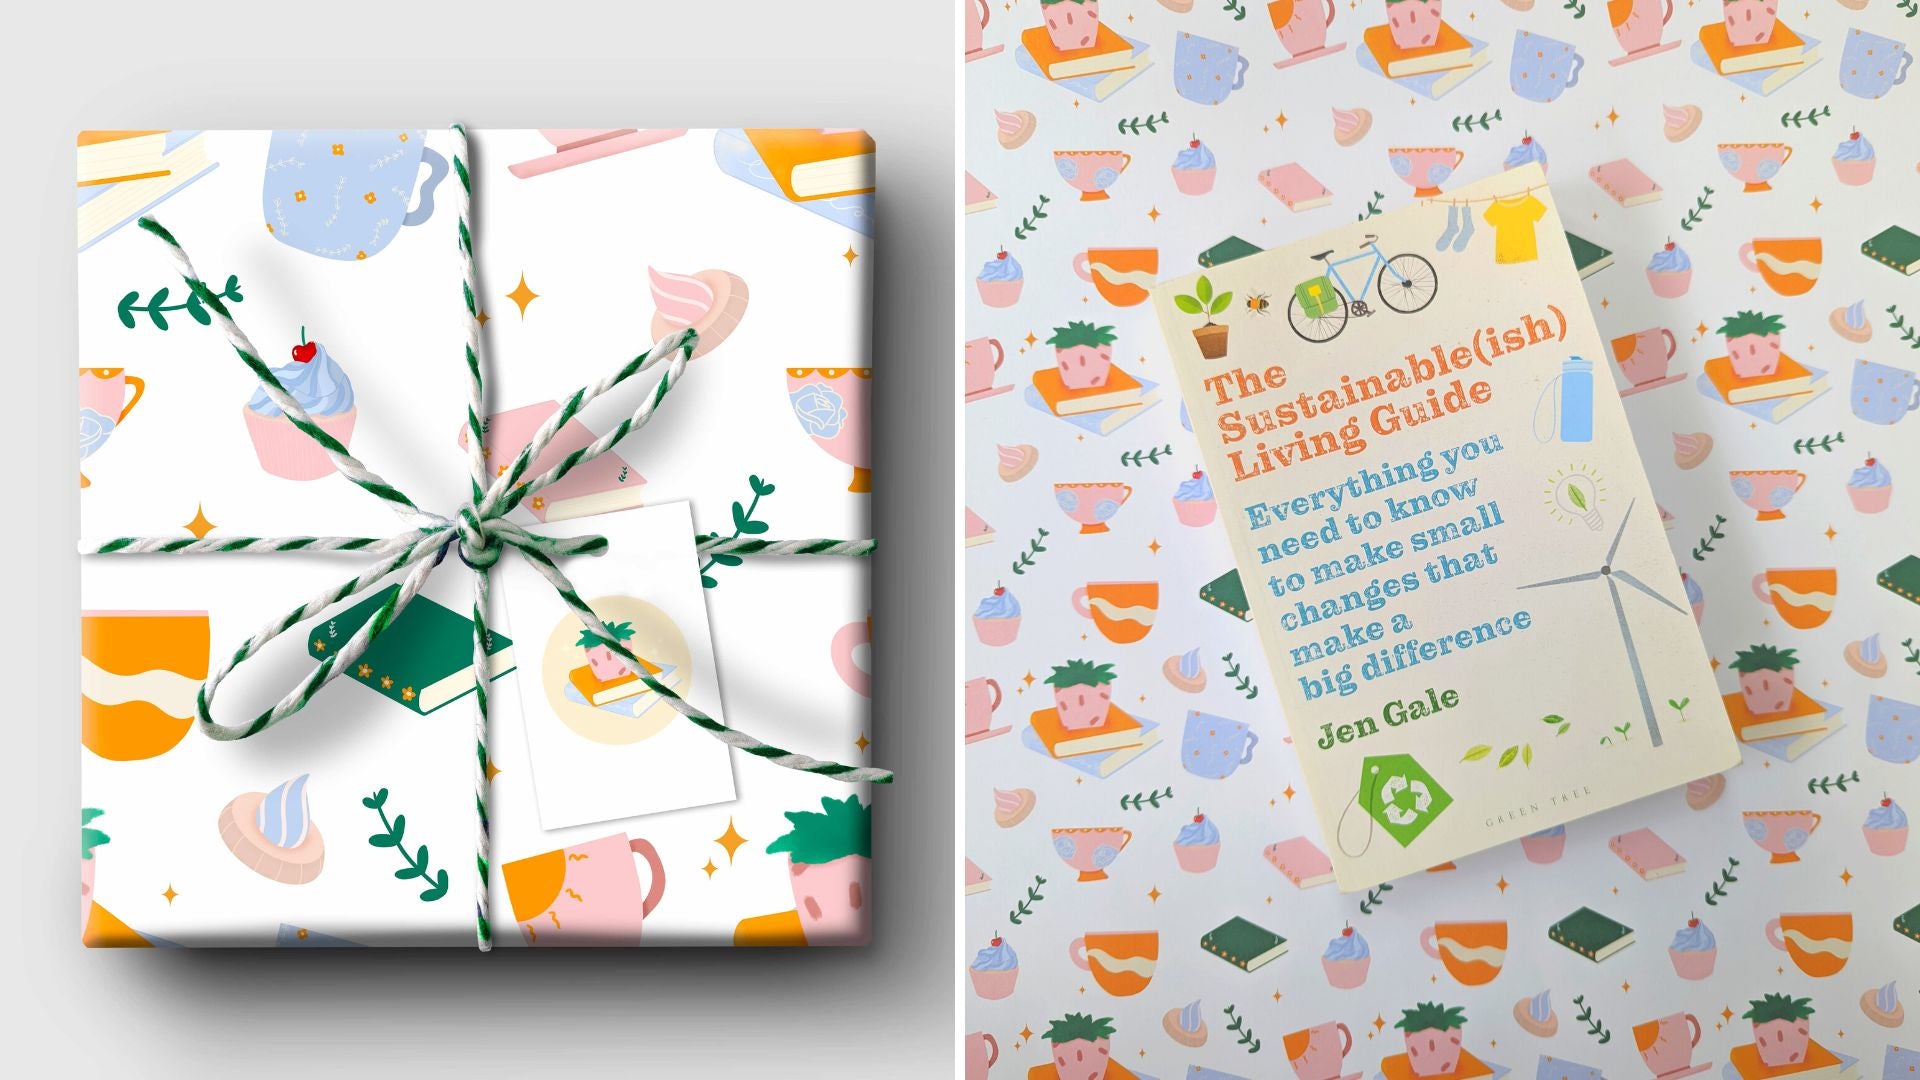 Image on the left shows a gift wrapped in Reader's Delight gift wrap which features books, teacups and cupcakes with a twine ribbon wrapped around it. Image on the right shows the book Sustainable(ish) by Jen Gale